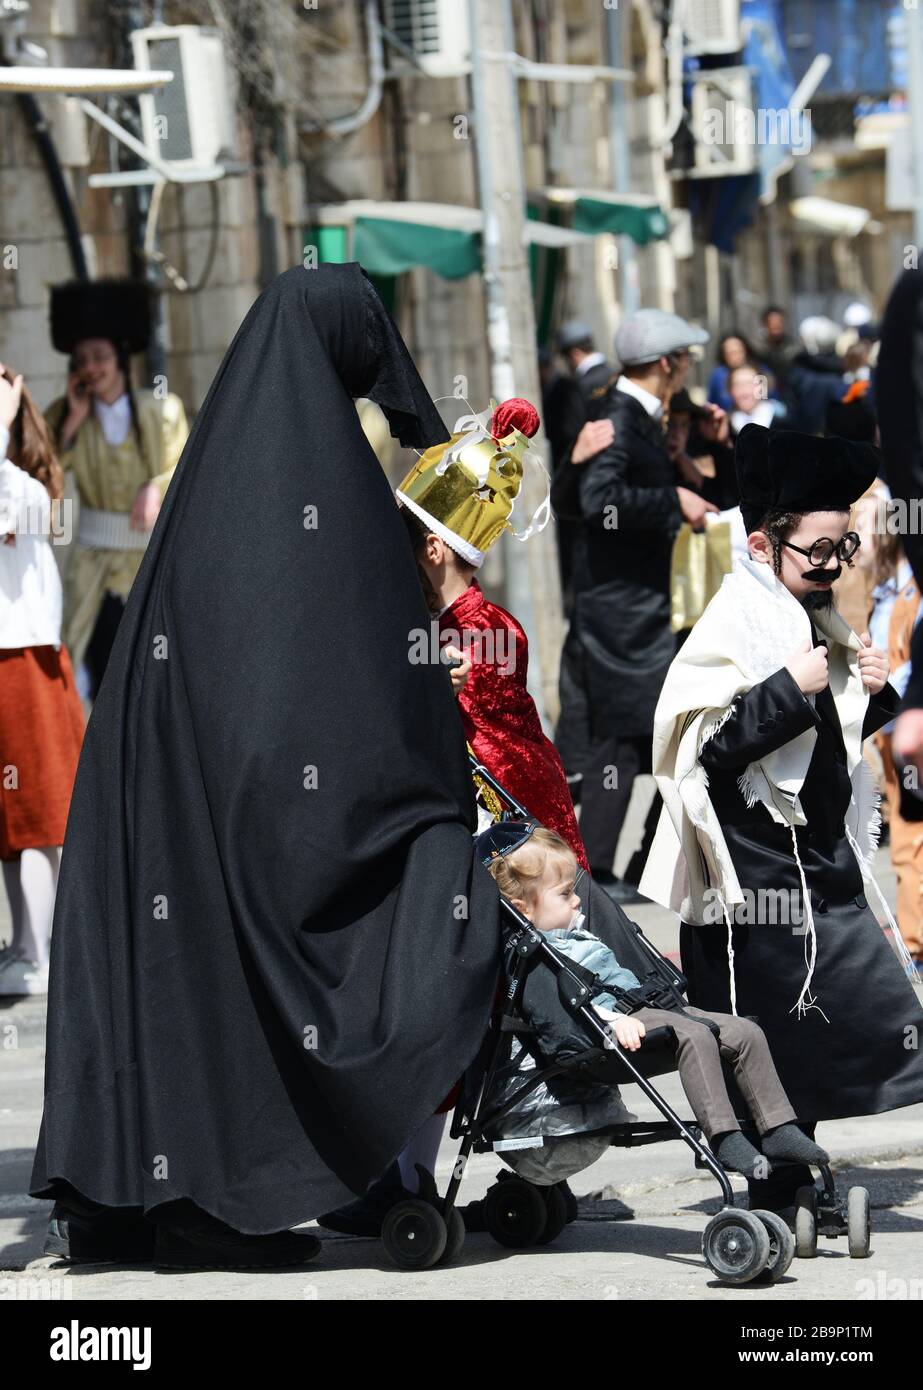 An Ultra-Orthodox Jewish woman that belongs to an extreme sect that is nicknamed 'the Jewish Taliban' walks with her face and body completely covered. Stock Photo